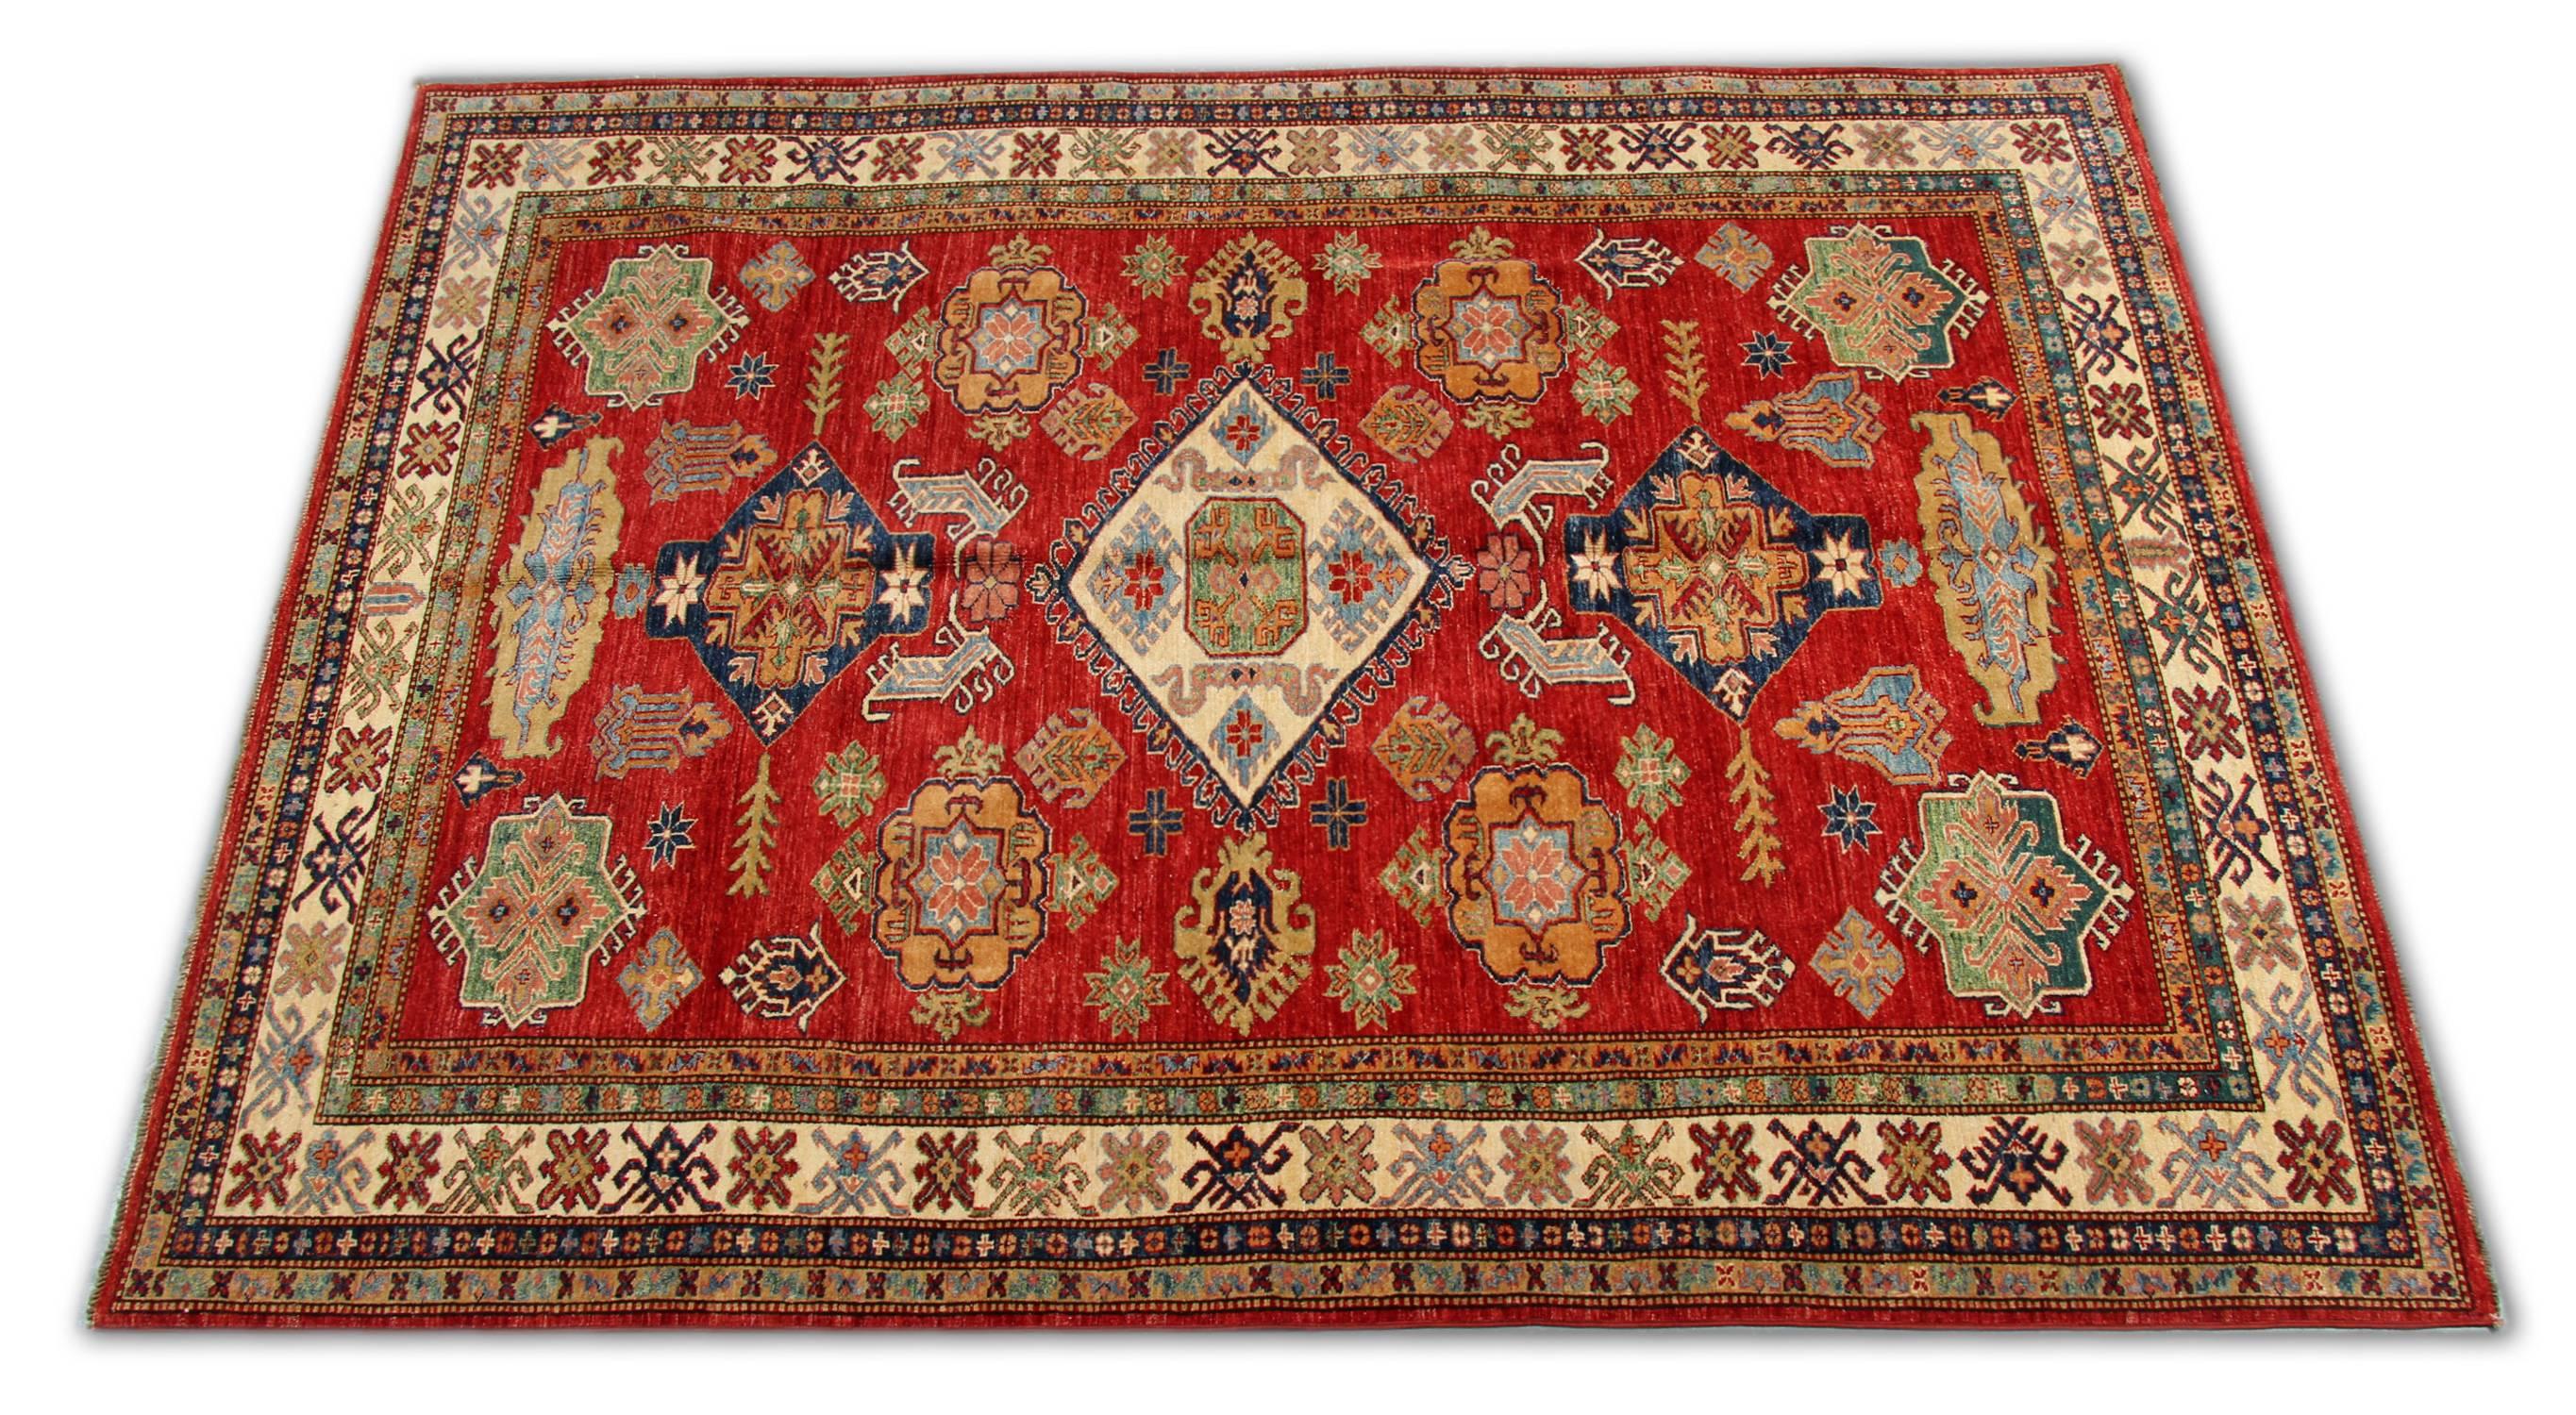 These new traditional handwoven rugs are featuring tribal rug designs from the Kazak region. This red rug has been made by Afghan weavers of top quality wool and cotton. These patterned rugs feature a typical geometric rug pattern. Dominant colours